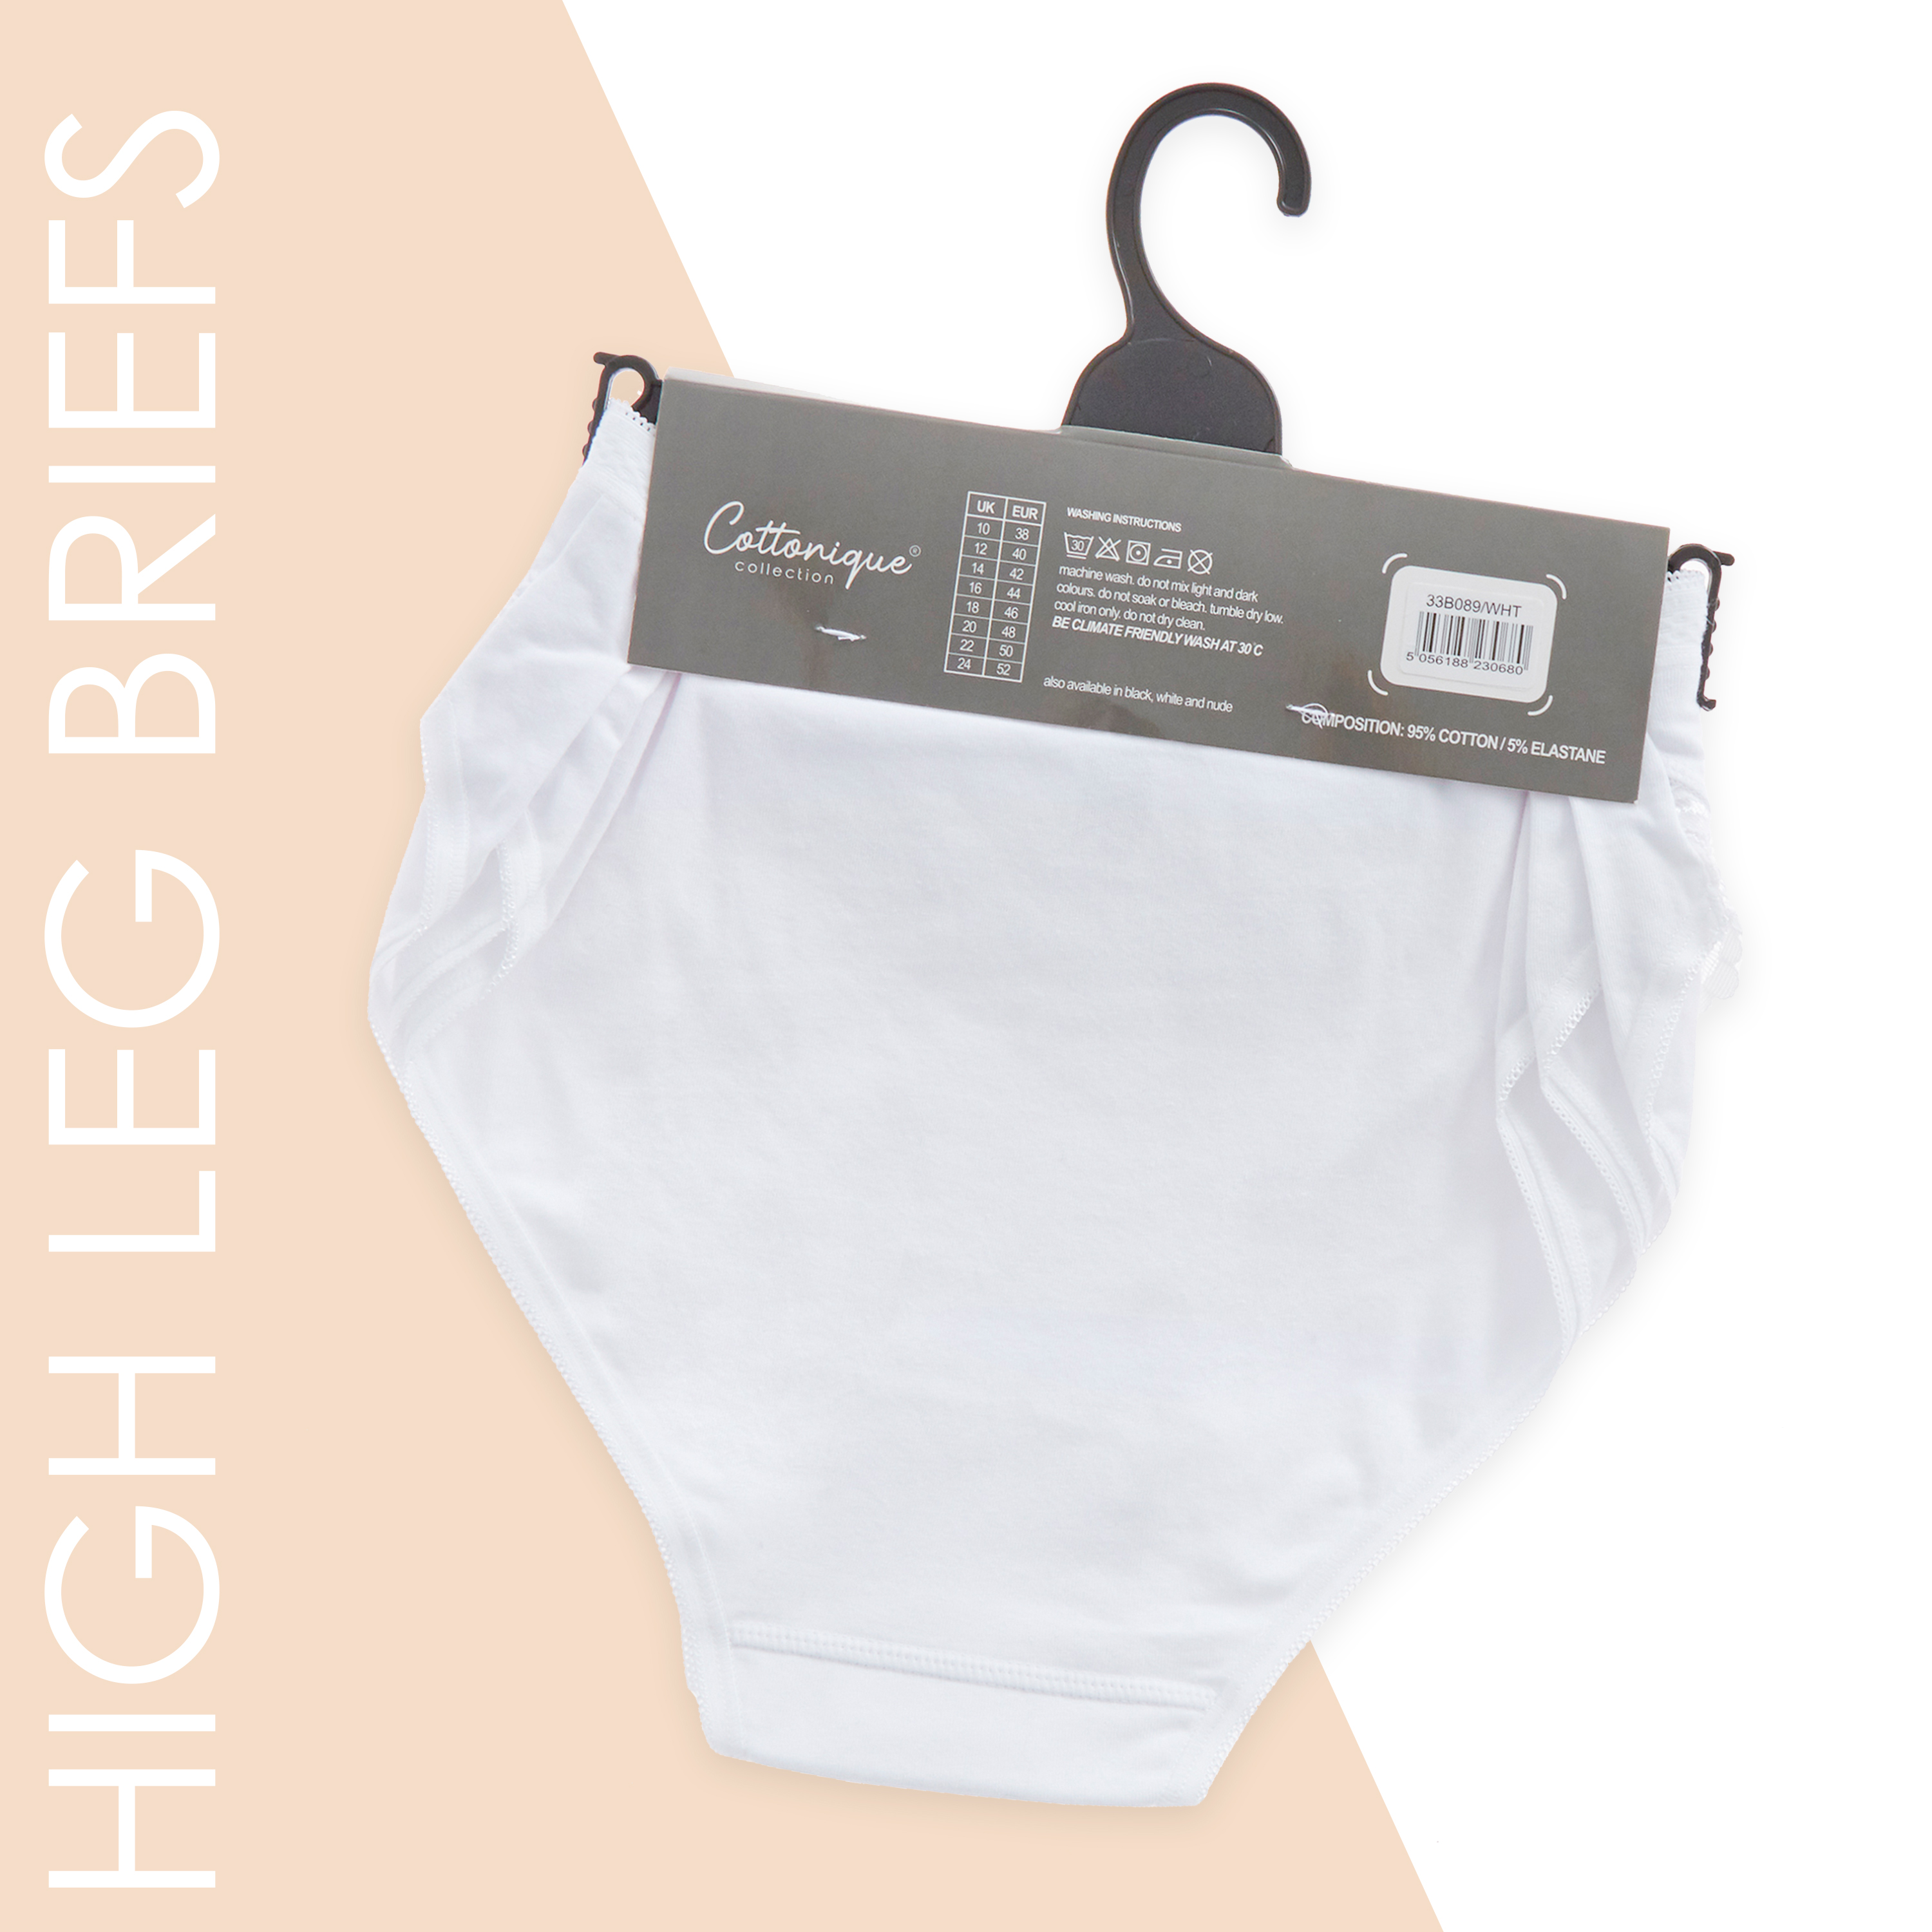 3 pack cotton knickers Color grey - RESERVED - WU994-85X